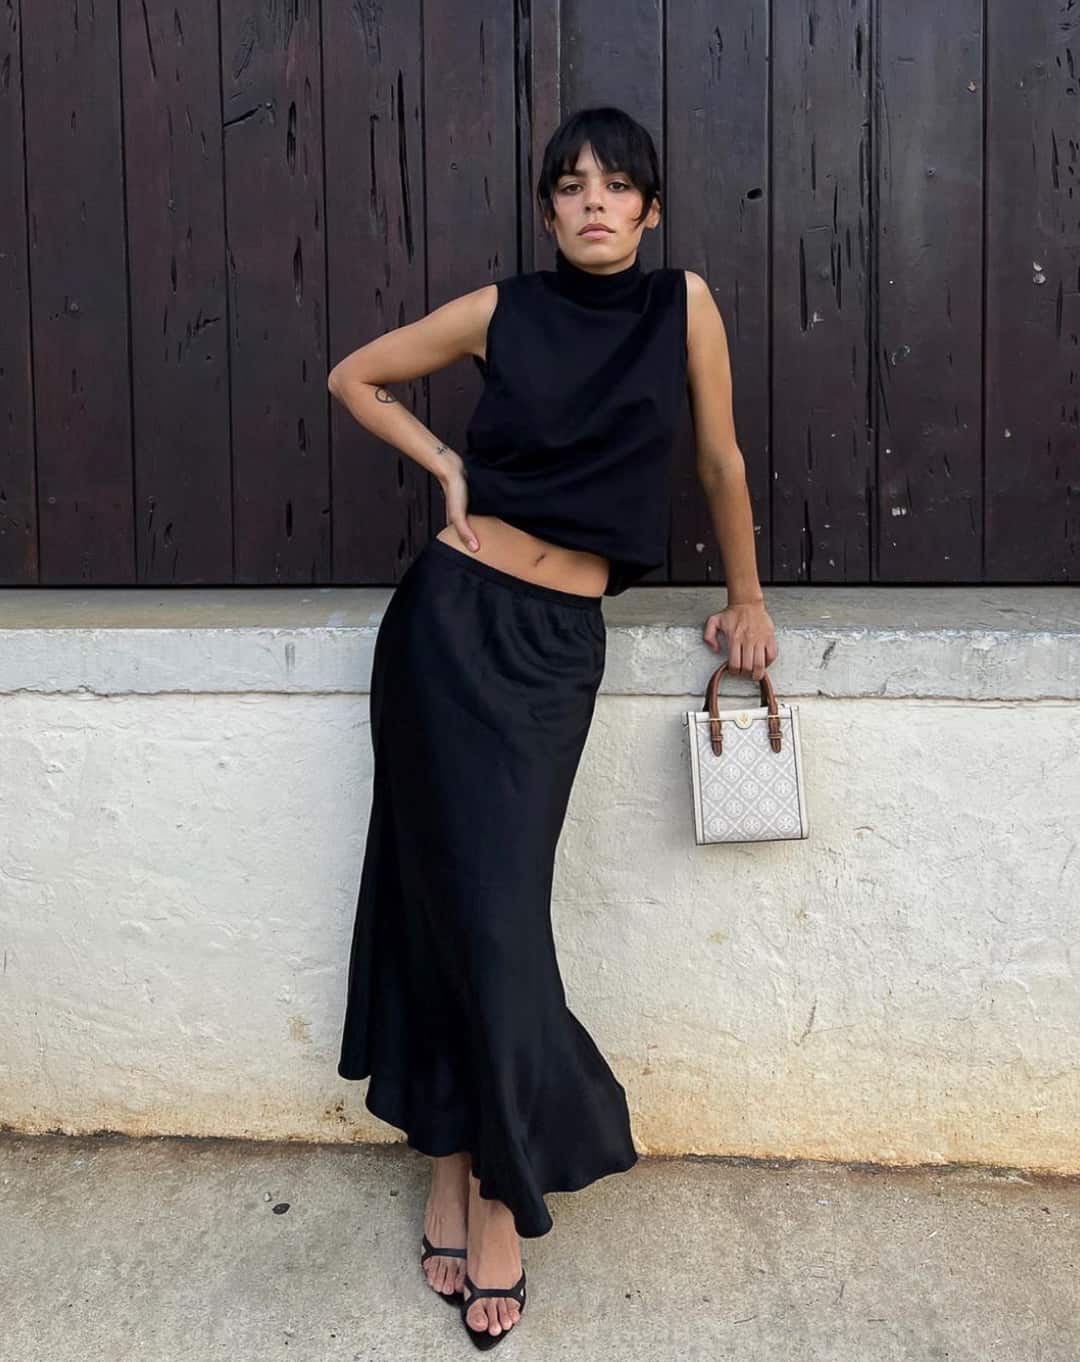 A woman wearing an all-black outfit with a midi skirt, heels, and a high-neck tank while holding a Tory Burch handbag